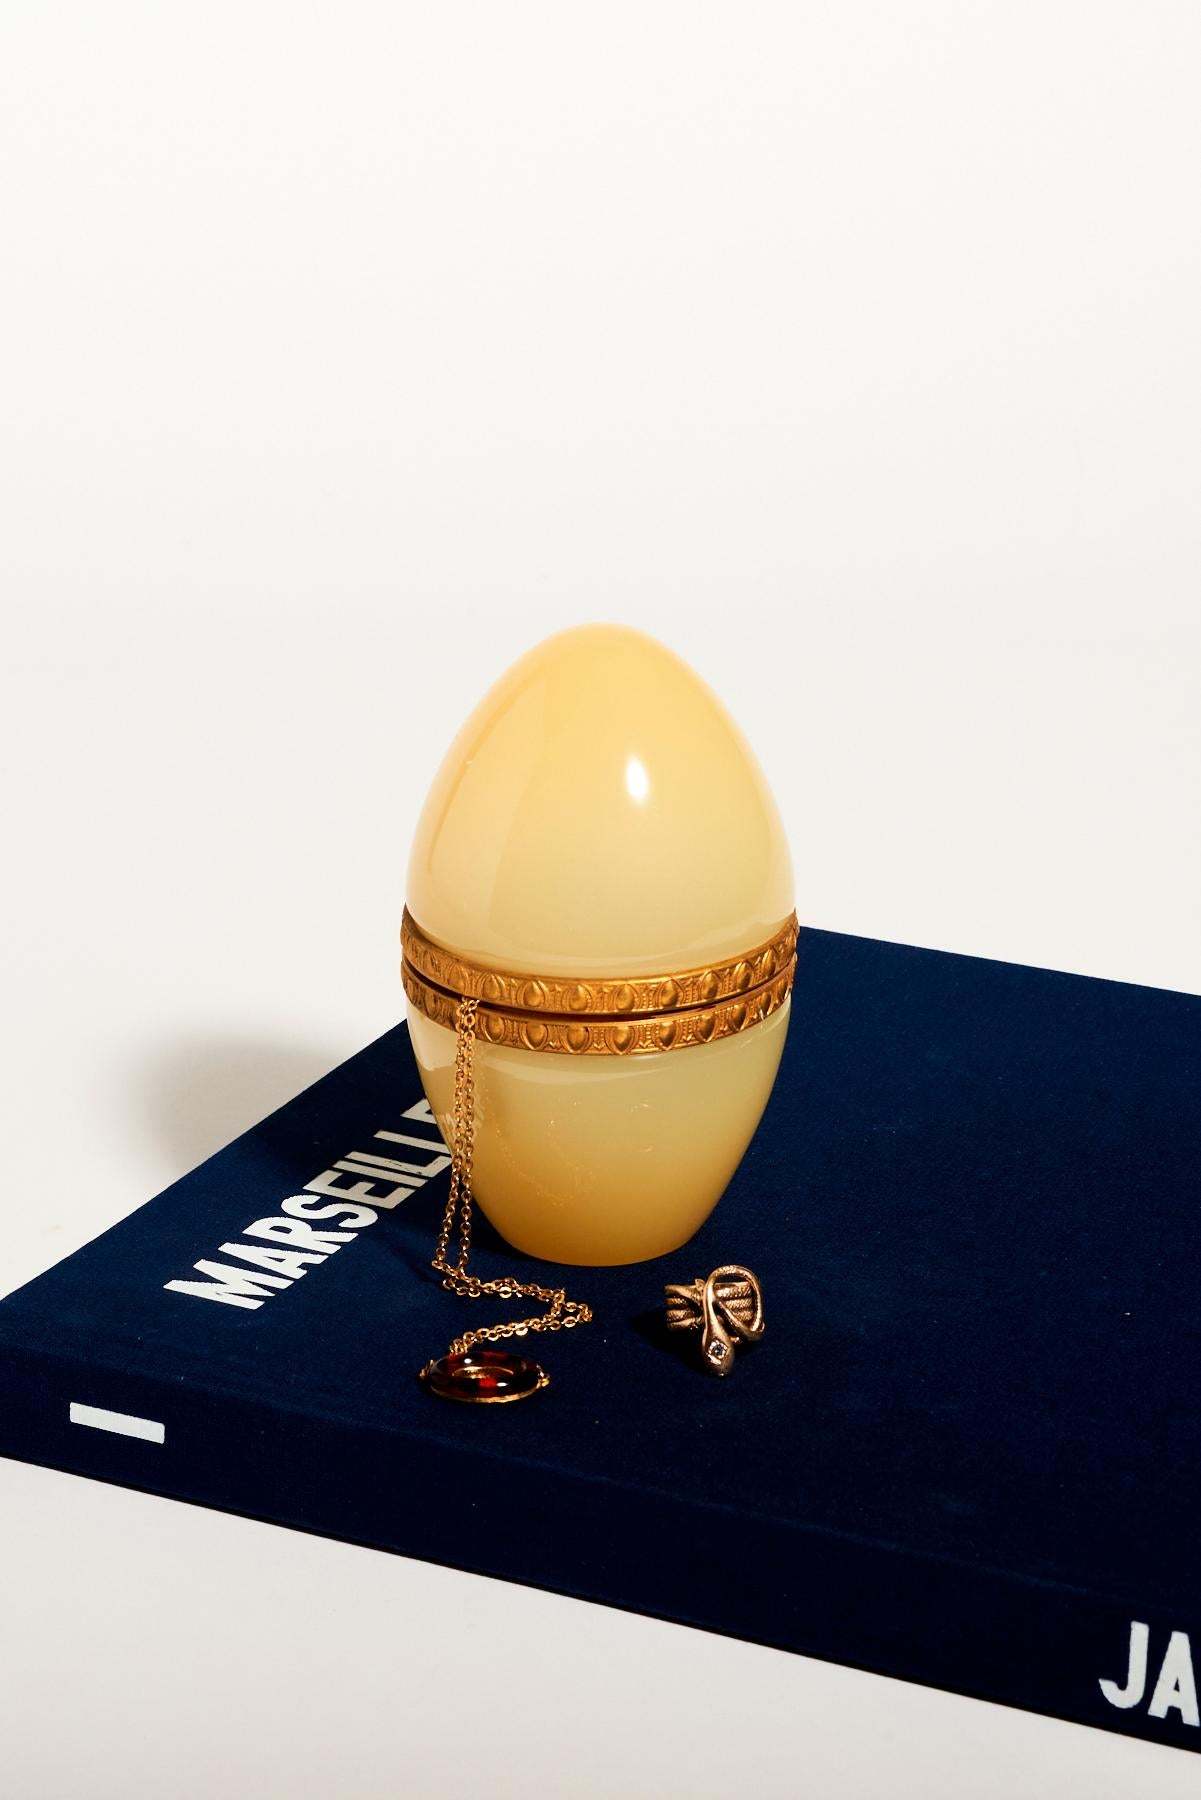 Rare opaline glass jewelry egg from France.